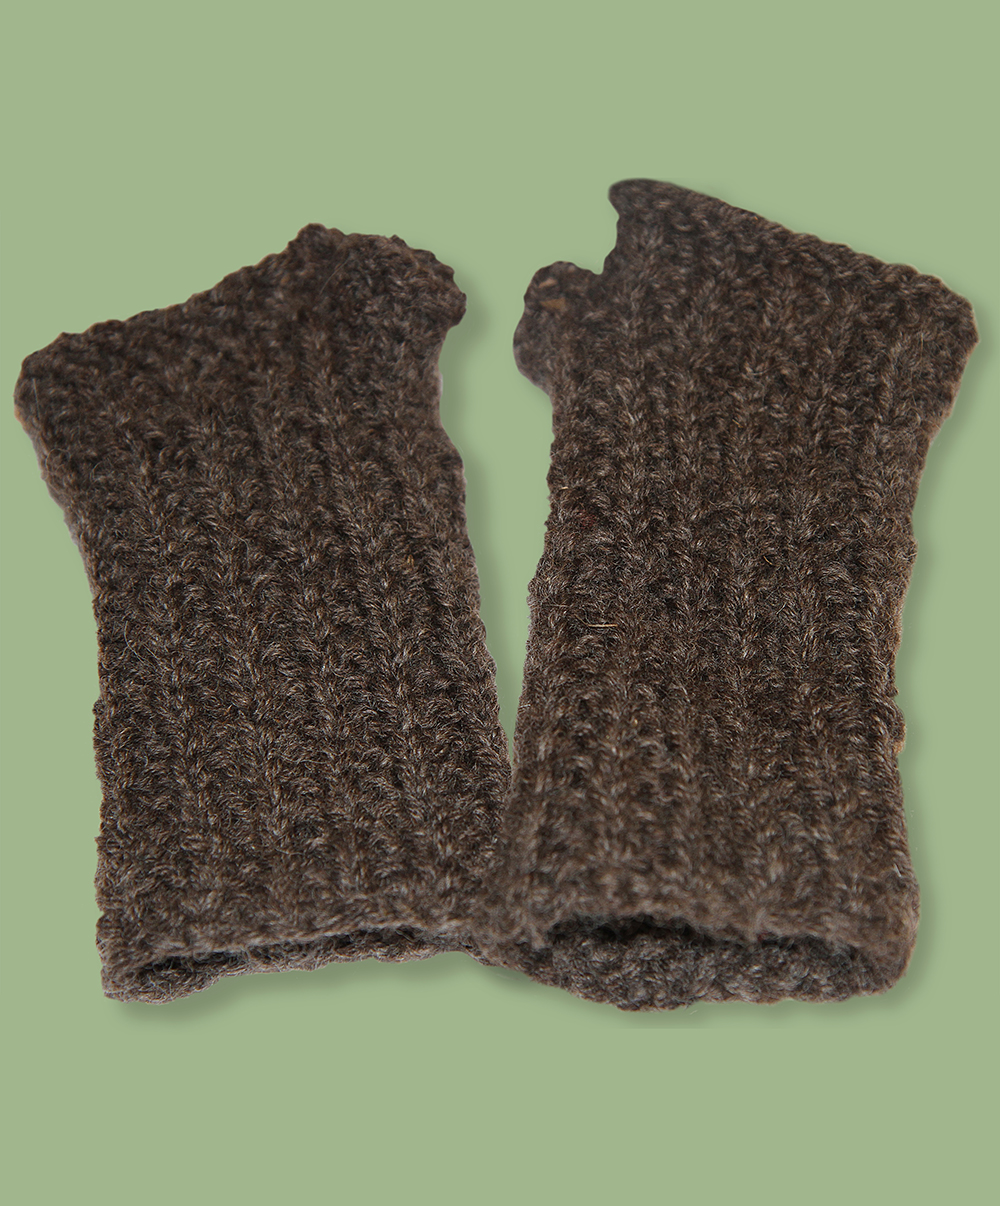 Gloves knit from Romney sheep wool